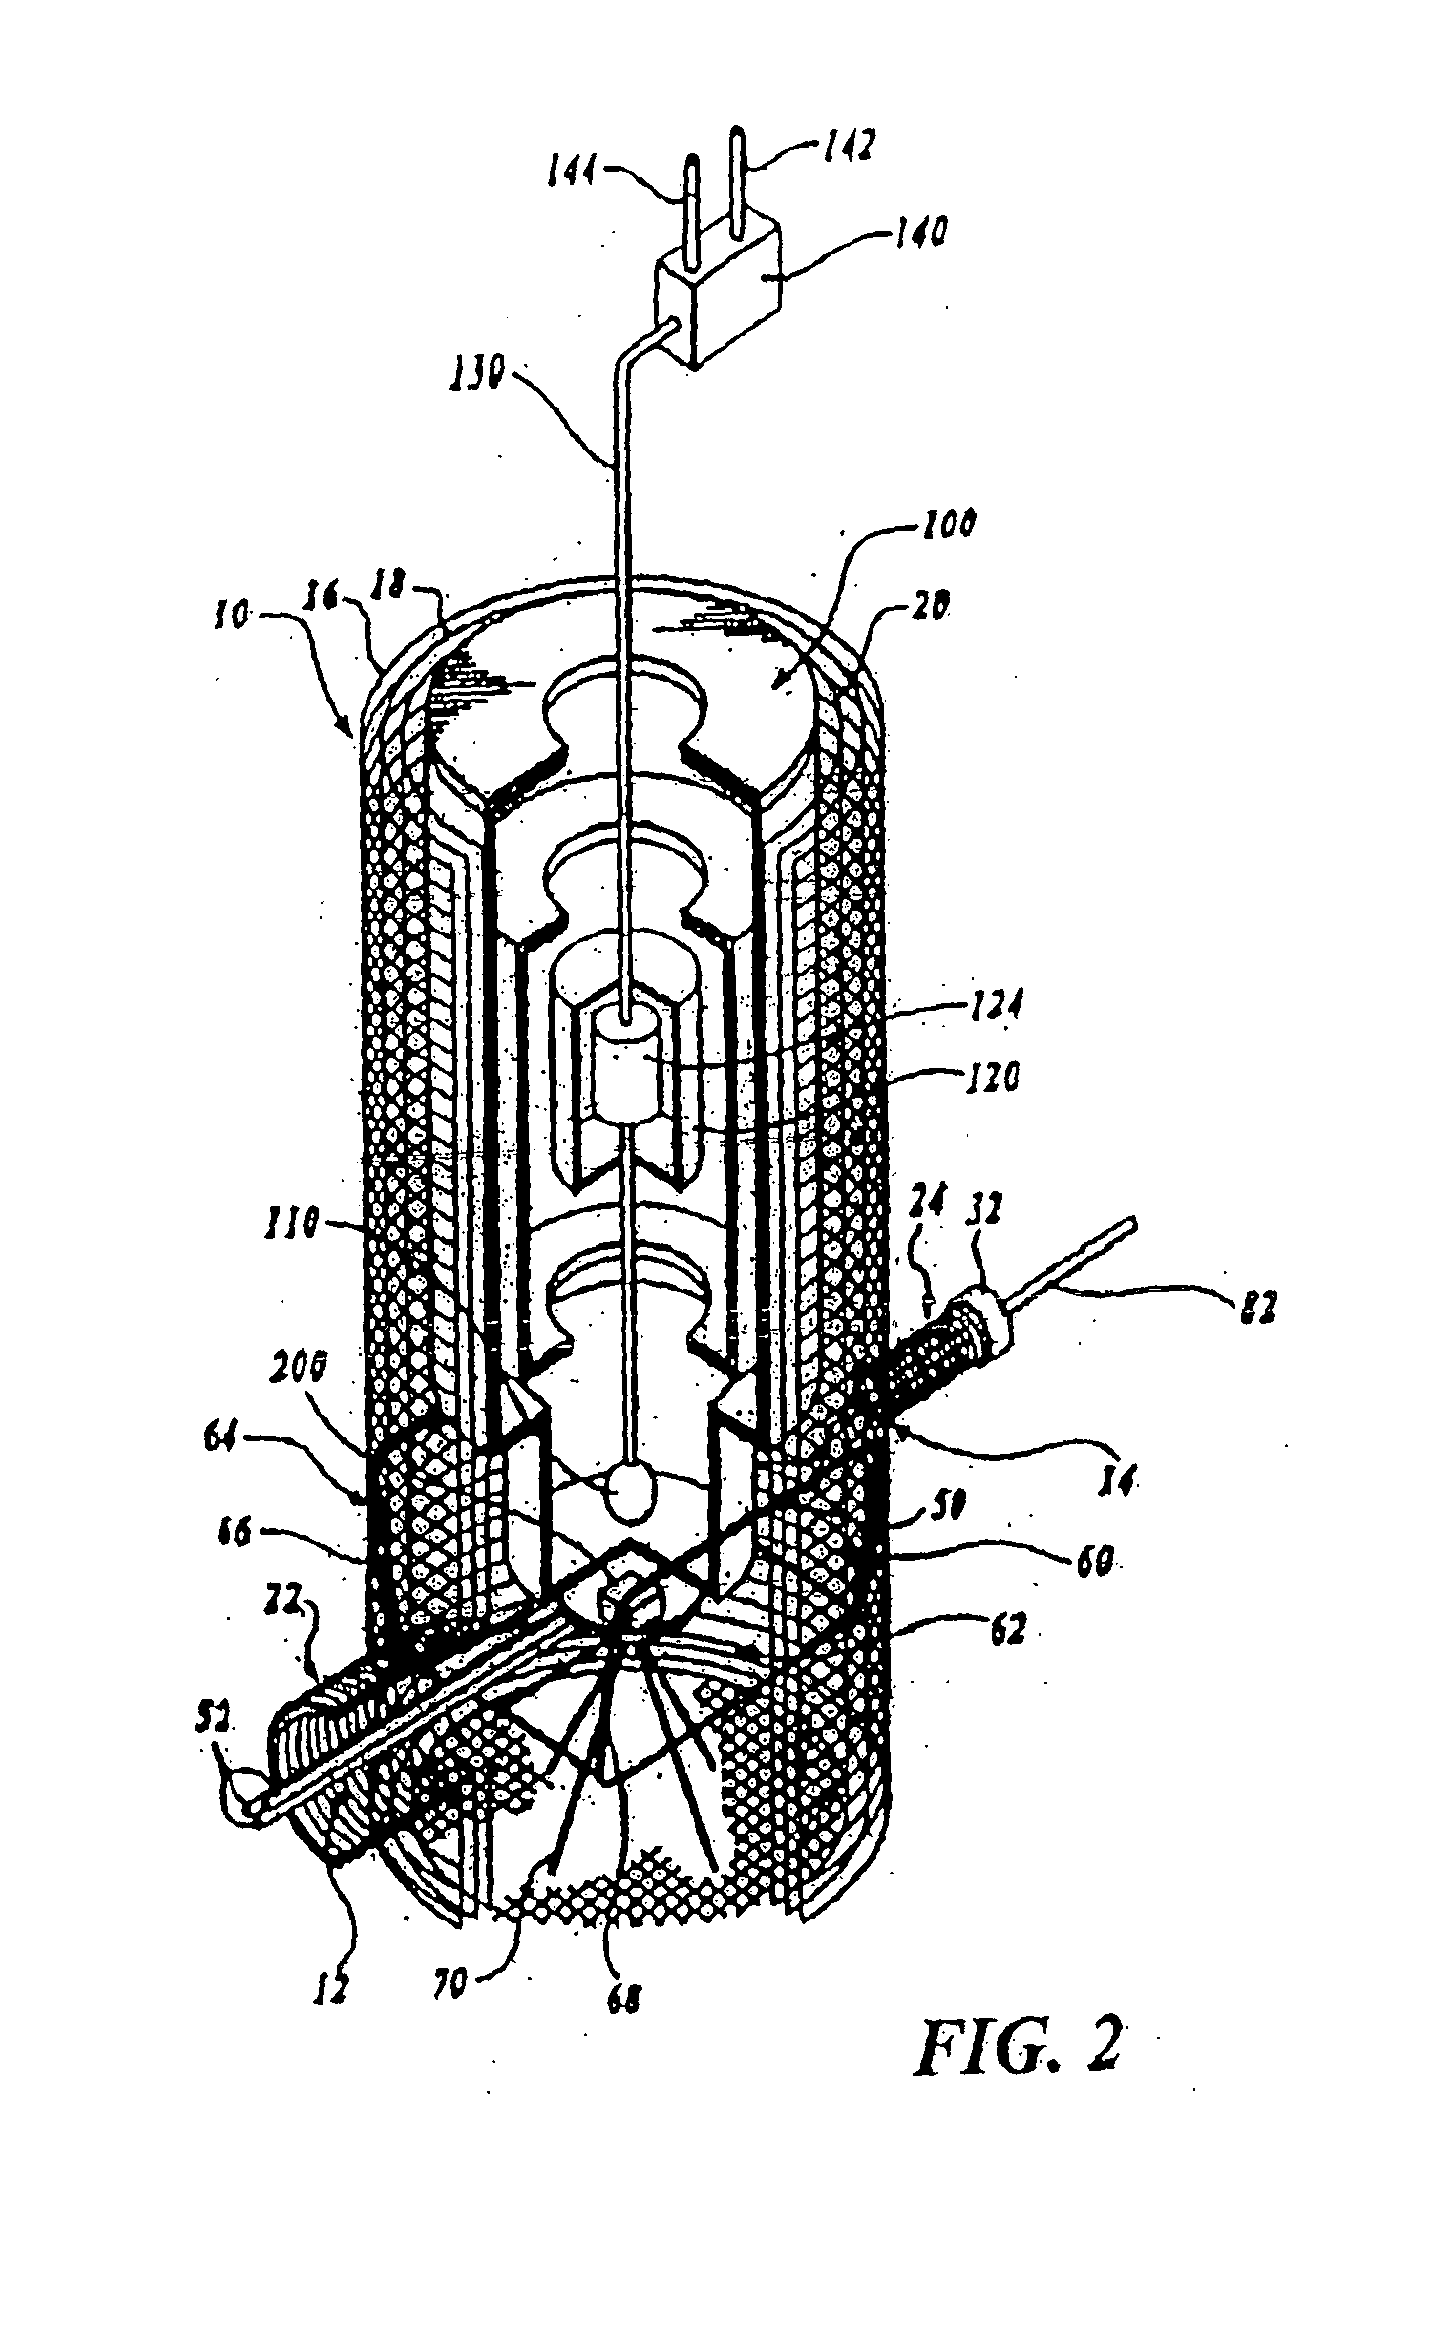 Apparatus and method for transducing an in vitro or mammalian system with a low-frequency signal